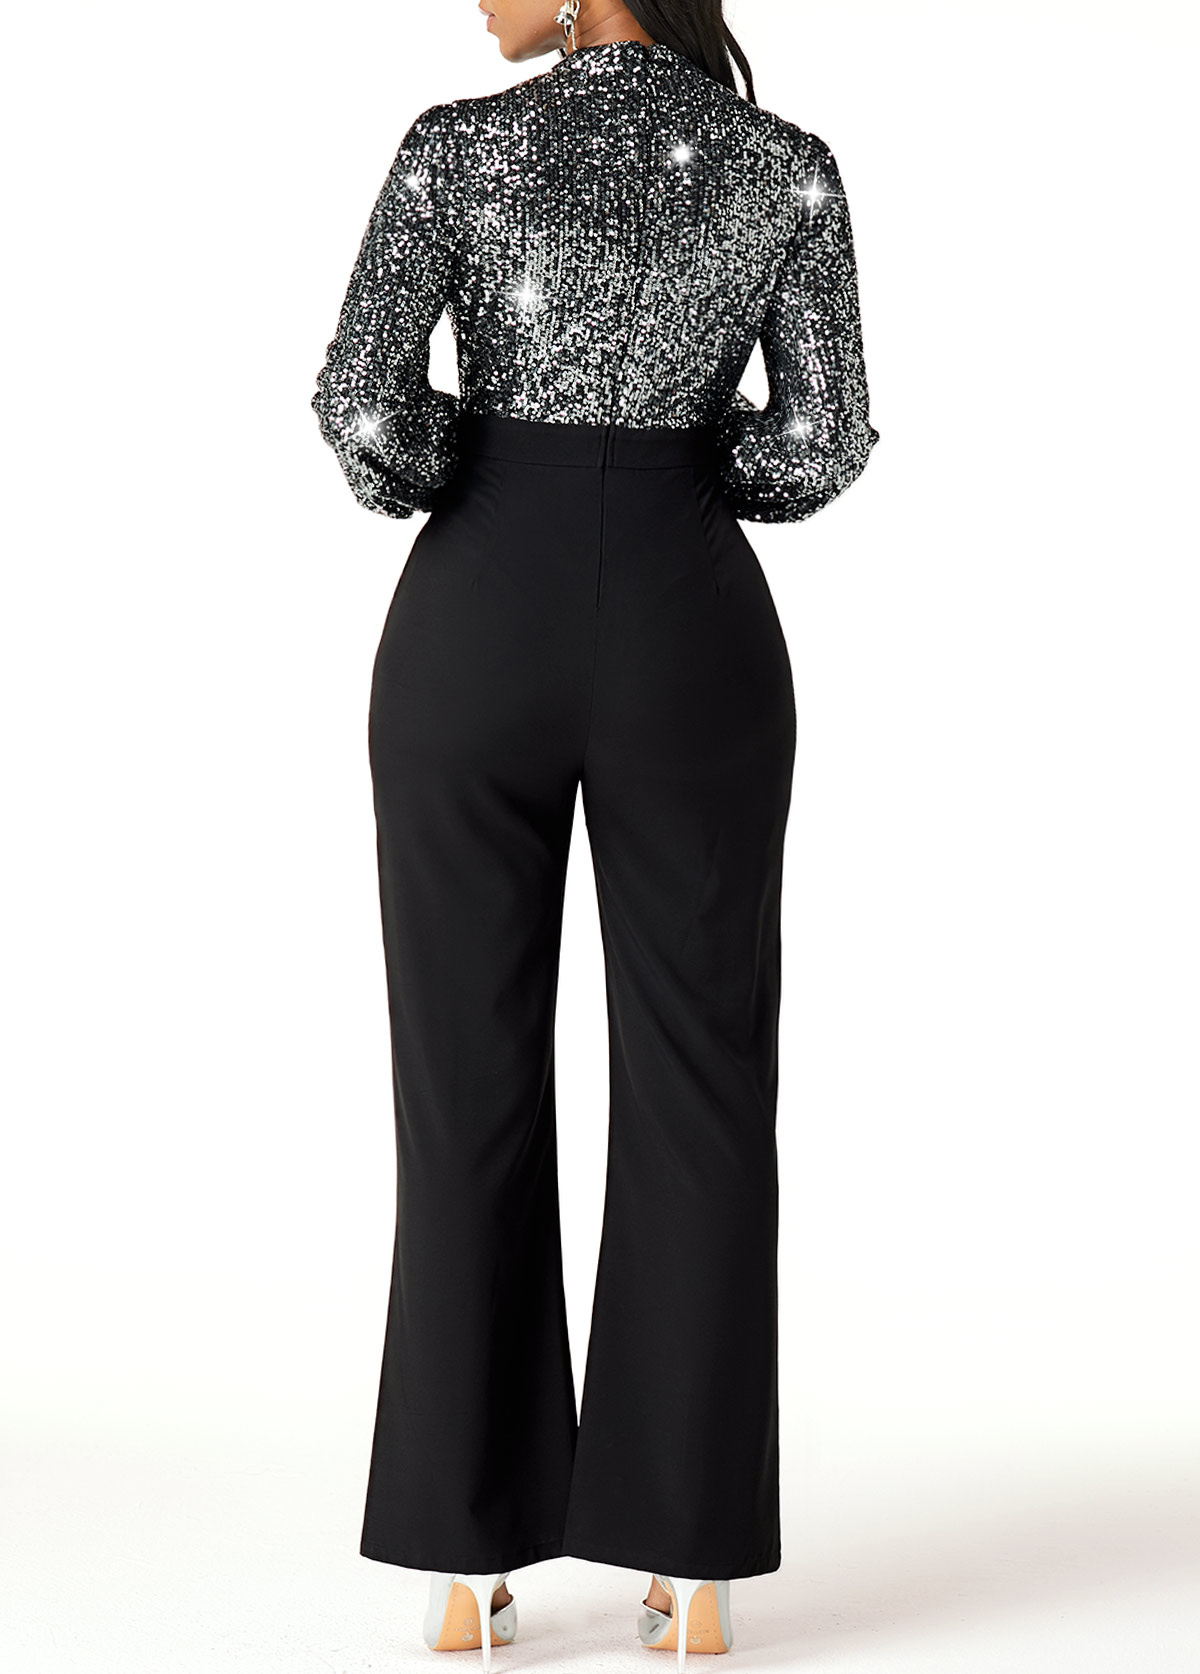 Cutout Front High Waist Sequin Embellished Jumpsuit | Rosewe.com - USD ...